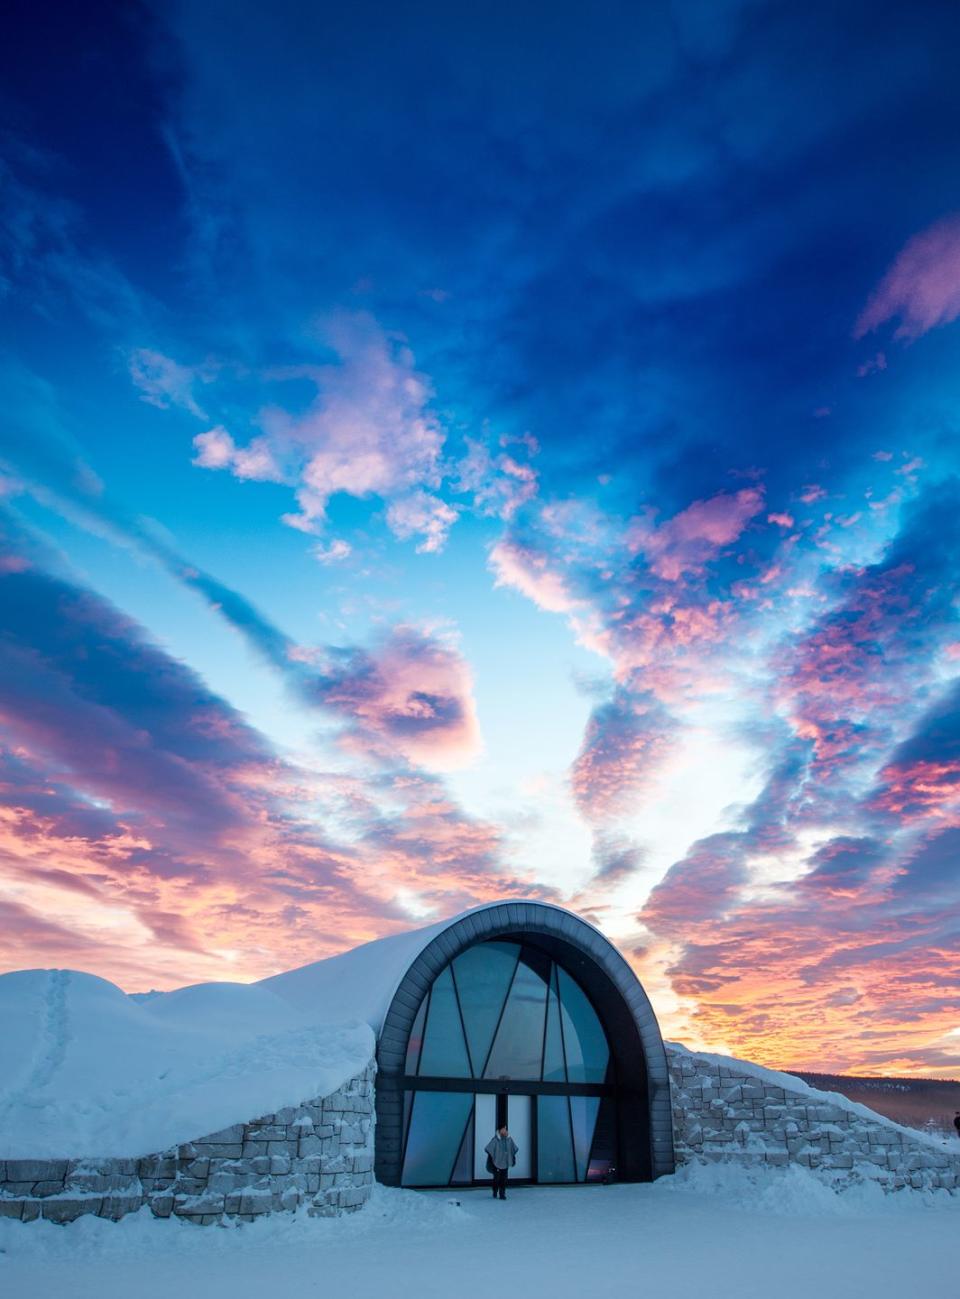 6) Catch a glimpse of the Lights from Sweden's ice hotel